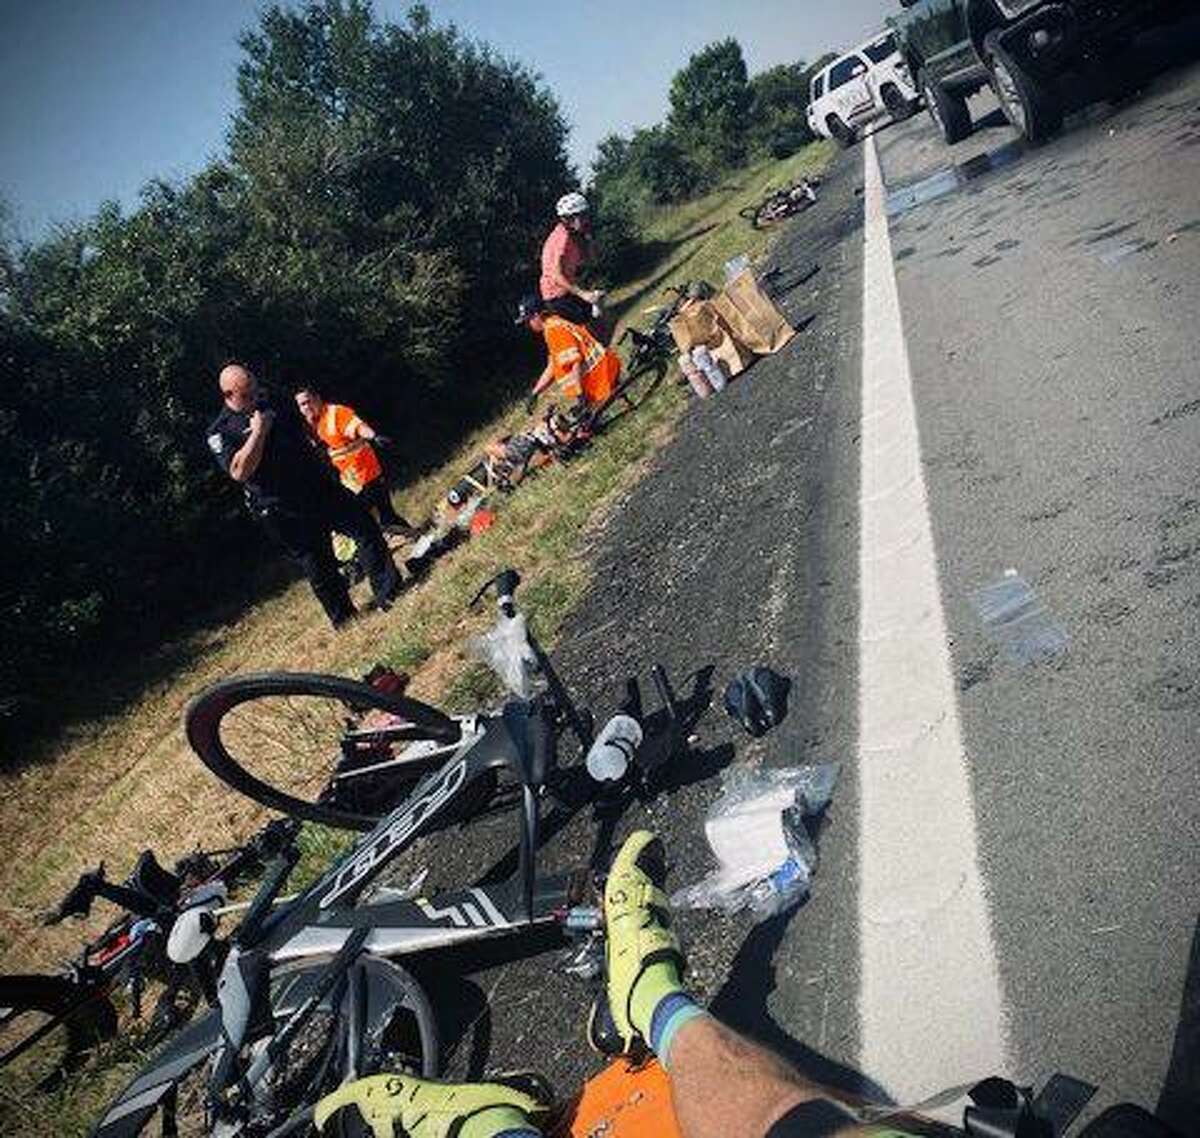 Six bicyclists were injured Sept. 25, 2021, in Waller, Texas, when witnesses say a pickup driver, 16, was intentionally blowing exhaust on them during a training ride.